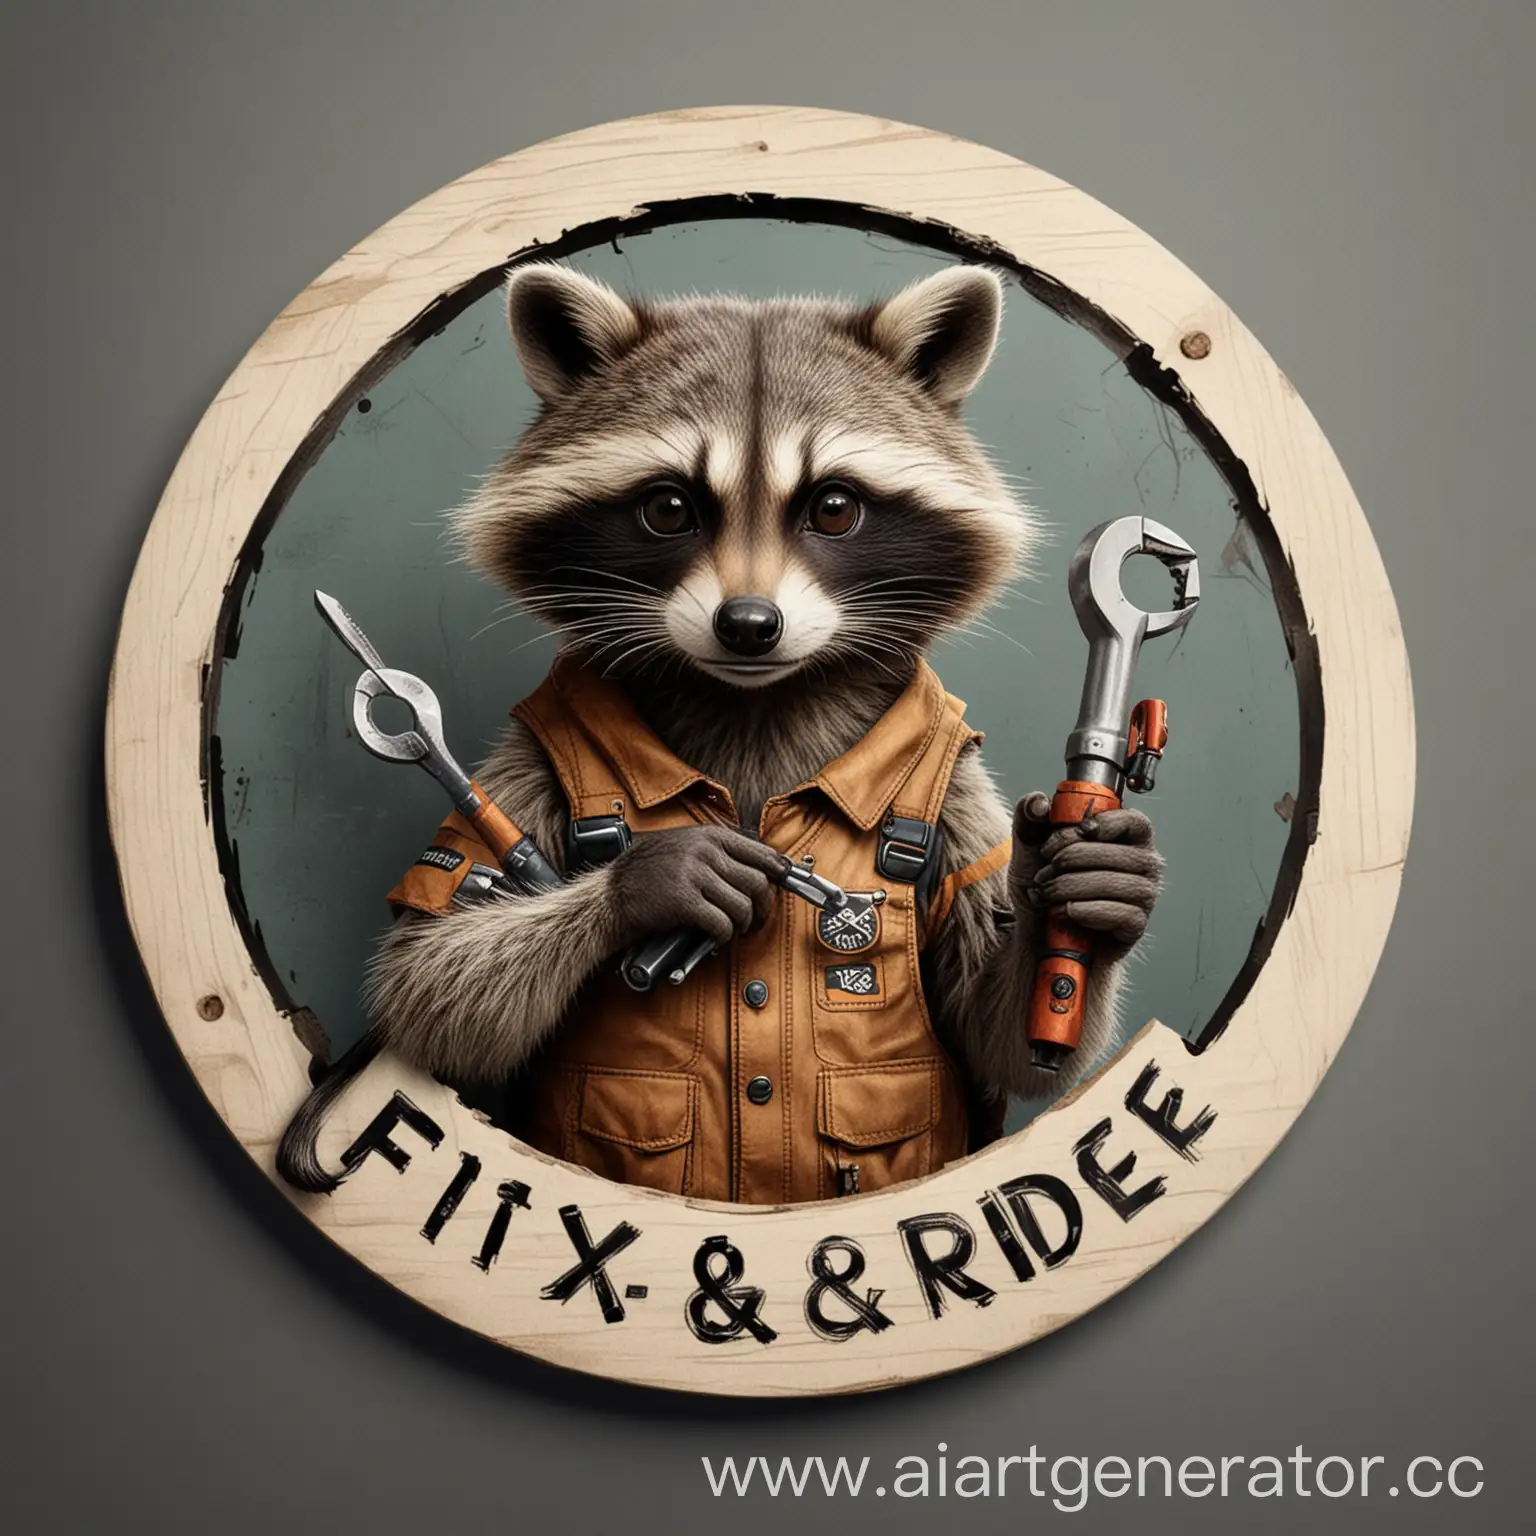 Pensive-Raccoon-with-Wrench-and-Screwdriver-in-Round-Logo-Fix-and-Ride-Emblem